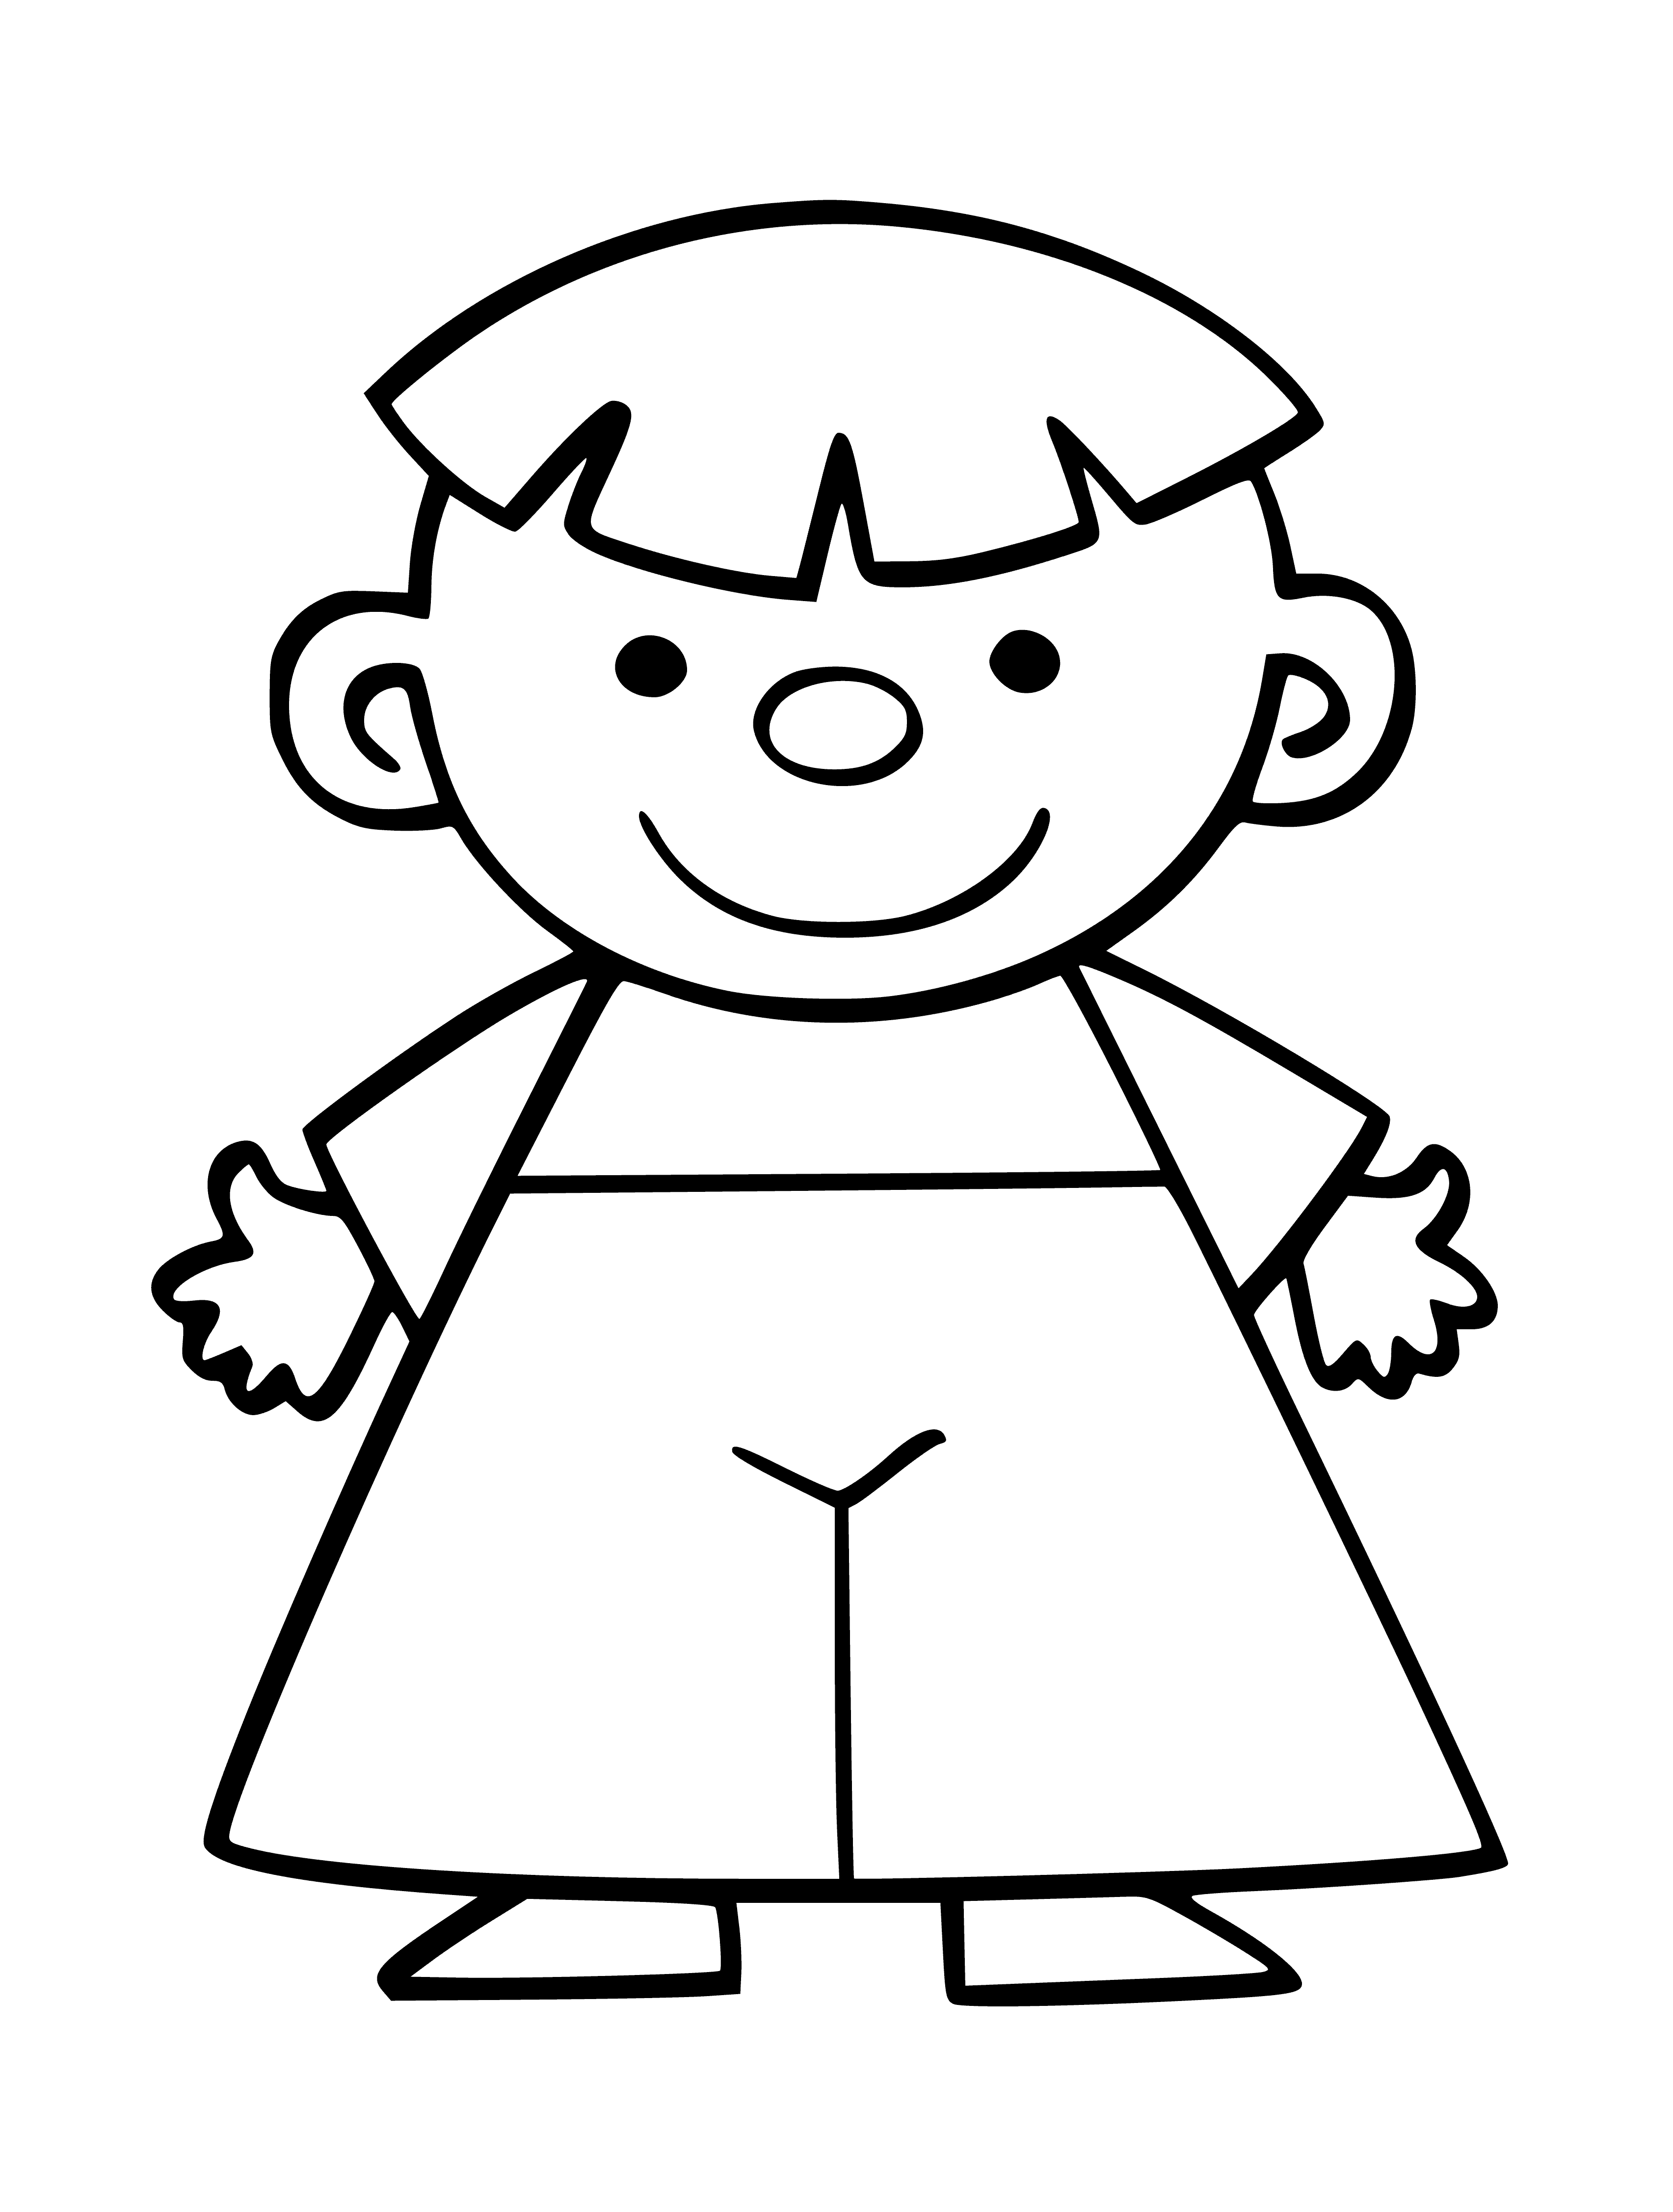 coloring page: 3 little people in a coloring page, wearing blue, green & red shirts with jeans & black shoes, arms crossed, hands in pockets & down.